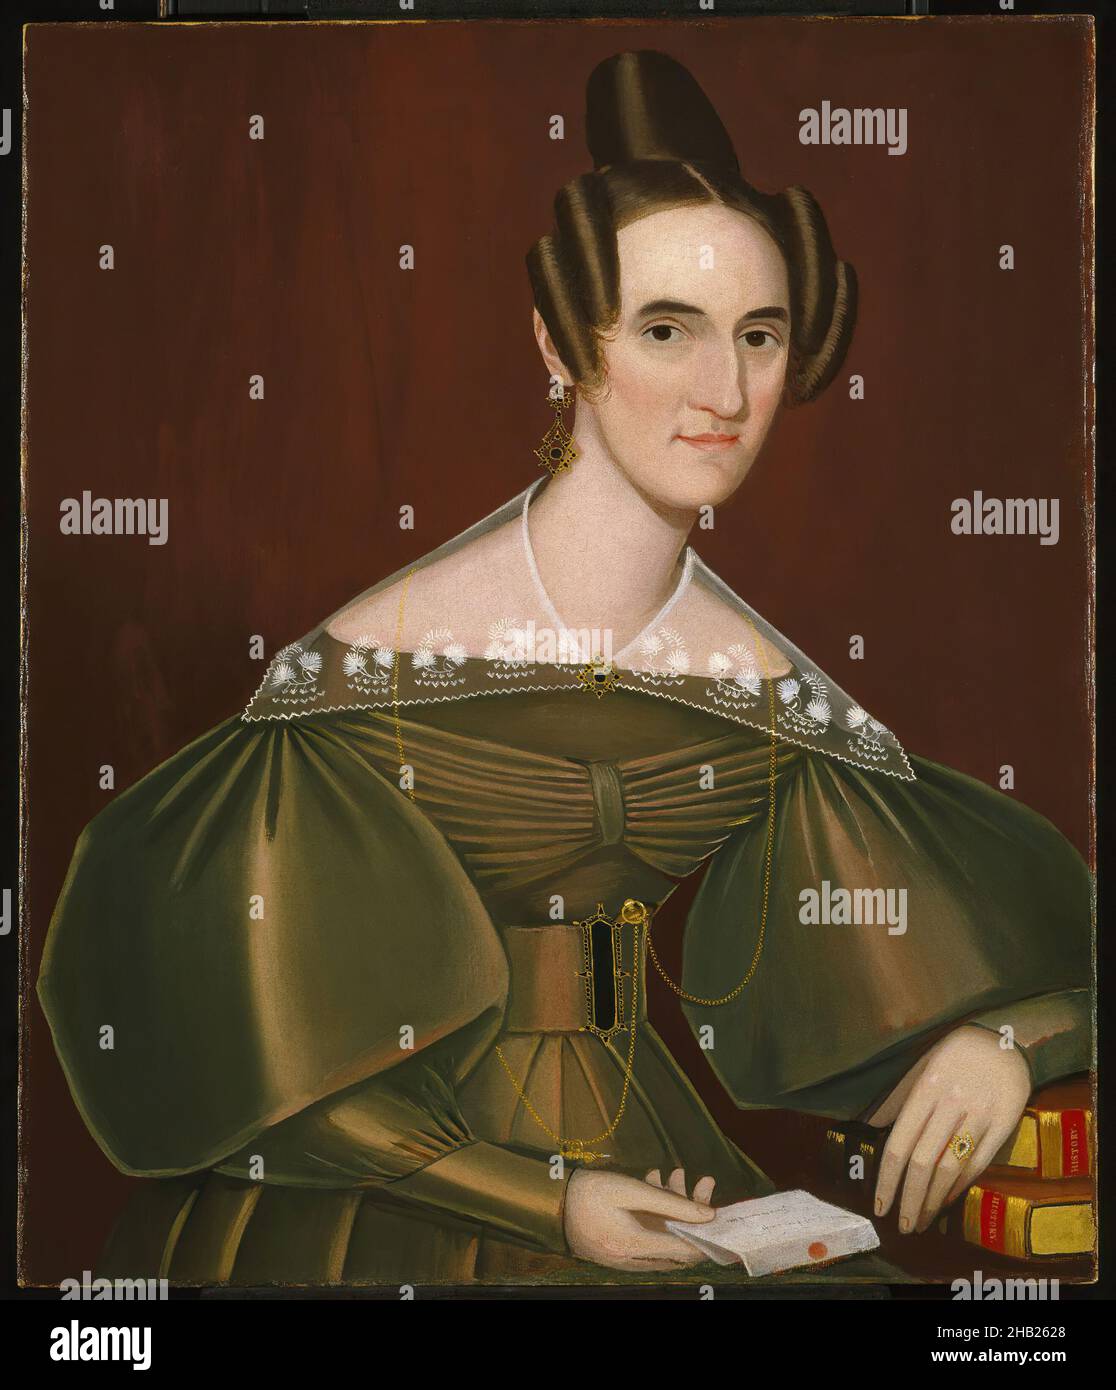 Jeannette Woolley, later Mrs. John Vincent Storm, Ammi Phillips, American, 1788-1865, Oil on canvas, ca. 1838, 33 x 27 15/16 in., 83.8 x 71 cm, 19th C, American primitive, chains, Early American, earring, Earrings, flat, jeannette Woolley, lace collar, oil on canvas, painting, plain style, portrait, portrait of a woman, primitive, woman Stock Photo